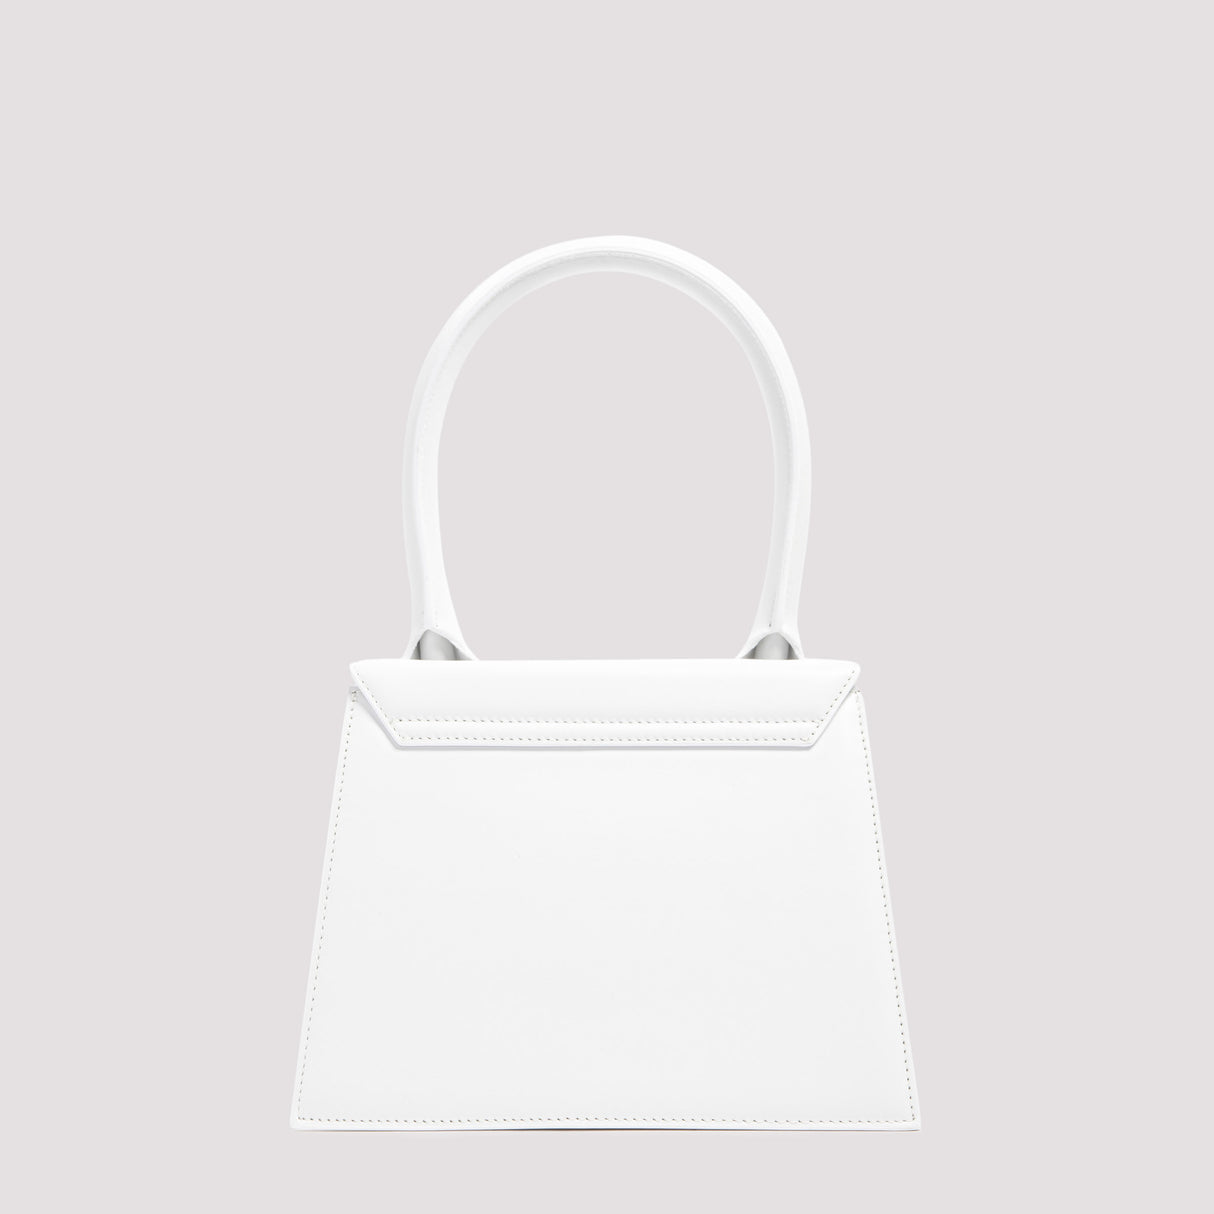 JACQUEMUS Stylish White Leather Shoulder Bag for Women